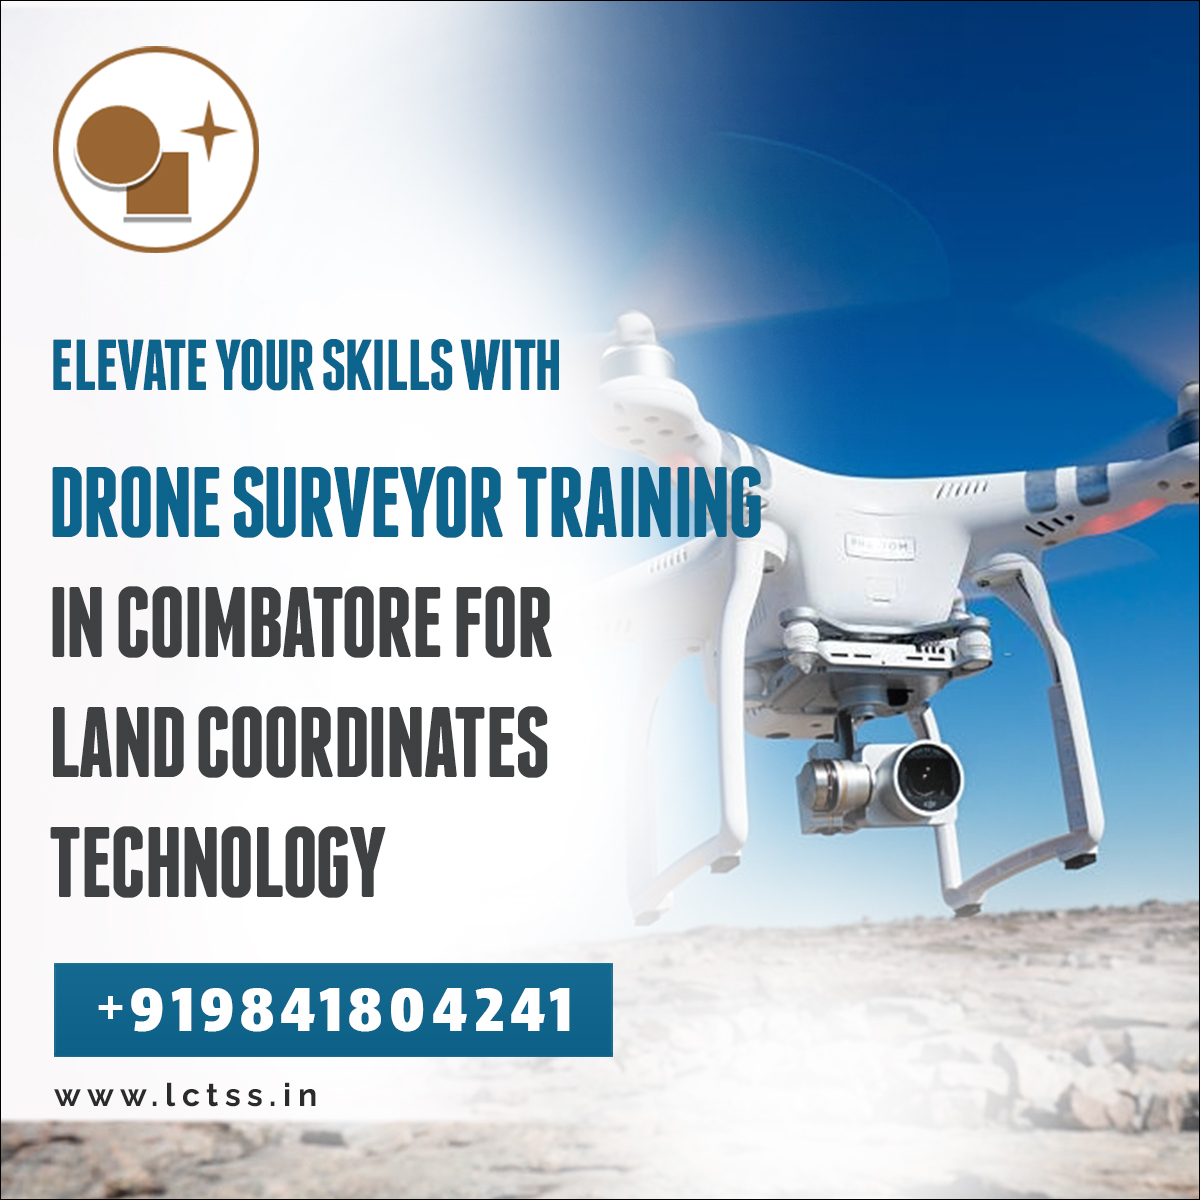 Elevate Your Skills with Drone Surveyor Training in Coimbatore for Land Coordinates Technology